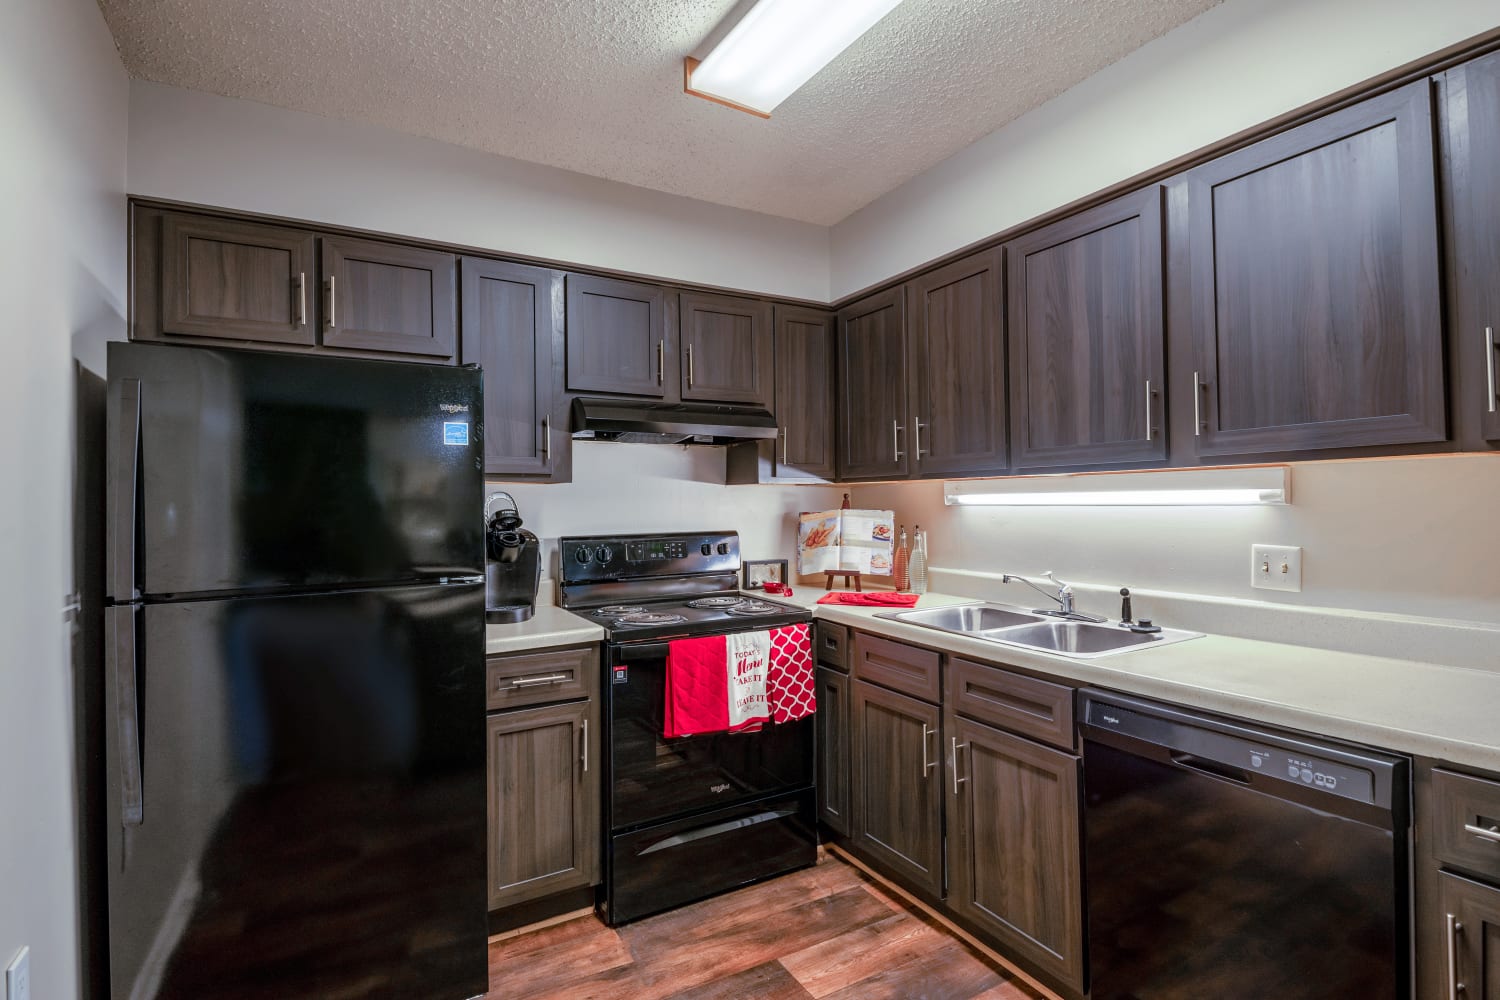 Kitchen of a model home at River Park Tower Apartment Homes in Newport News, Virginia